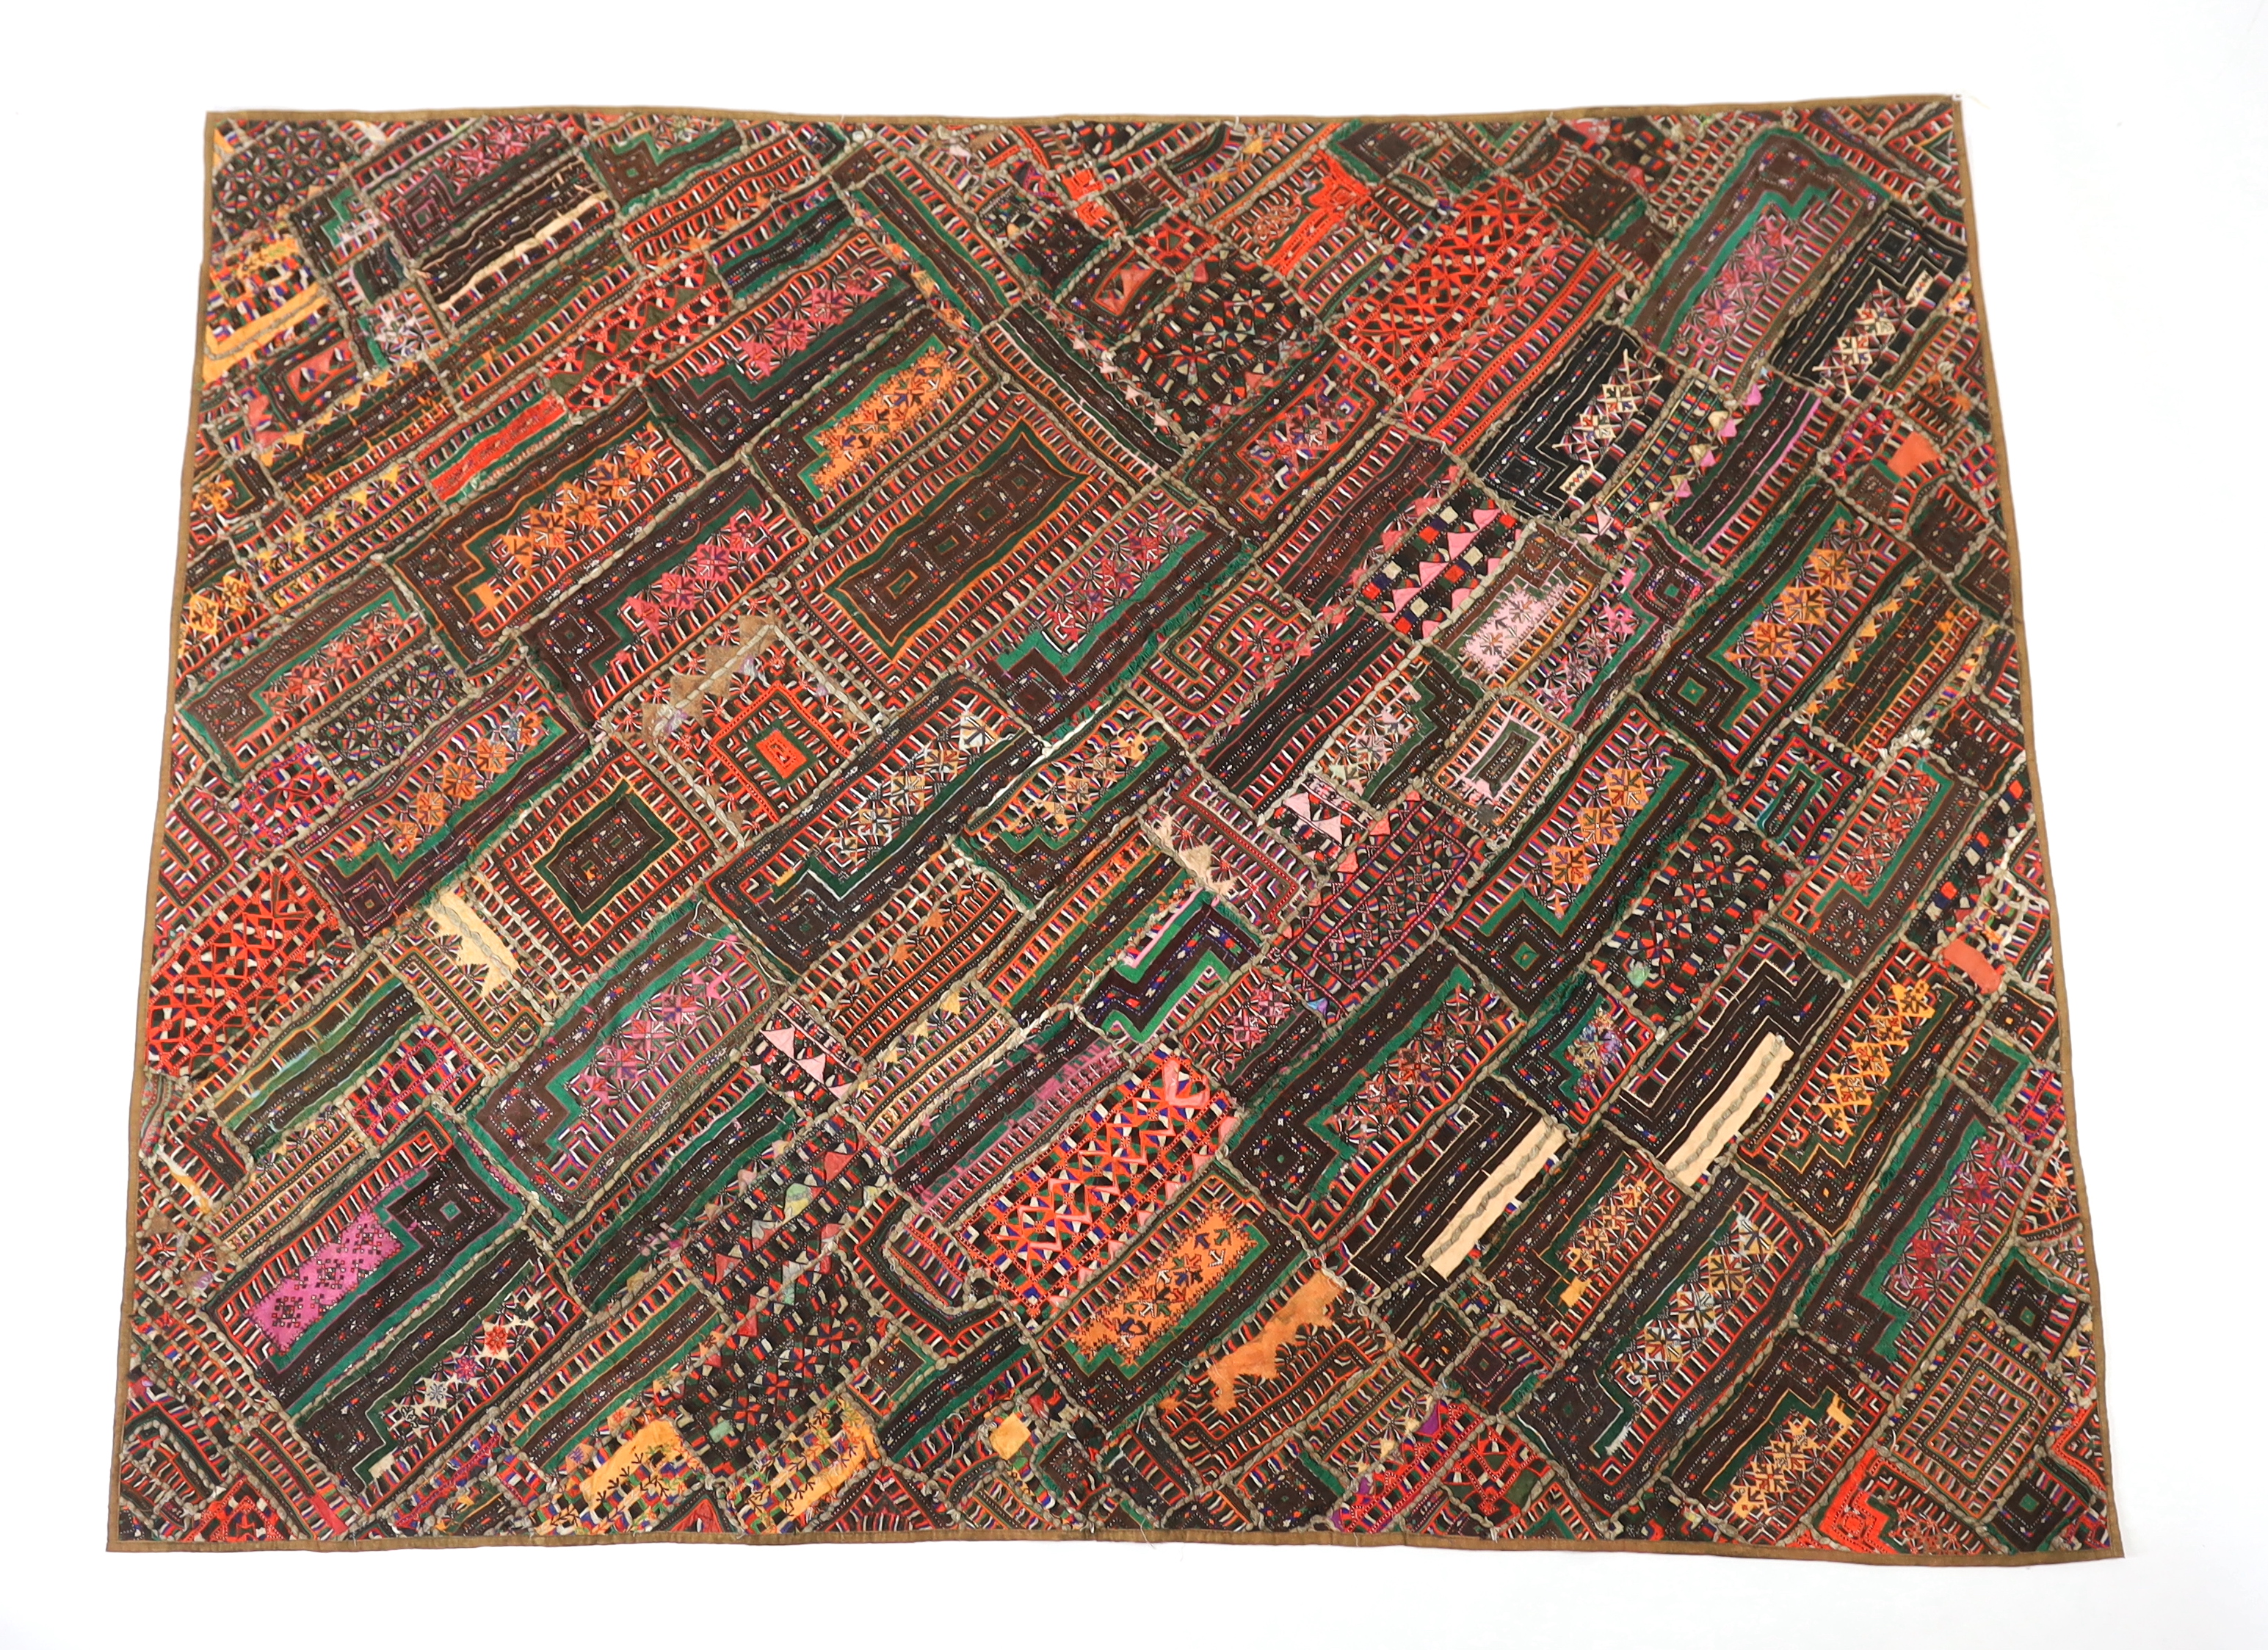 An interesting 20th century North Indian or Tibetan patchworked cover, worked in silk, wool and cotton embroidery in varying colours using thick bundles of threads to border / outline the patchwork, this has possibly bee